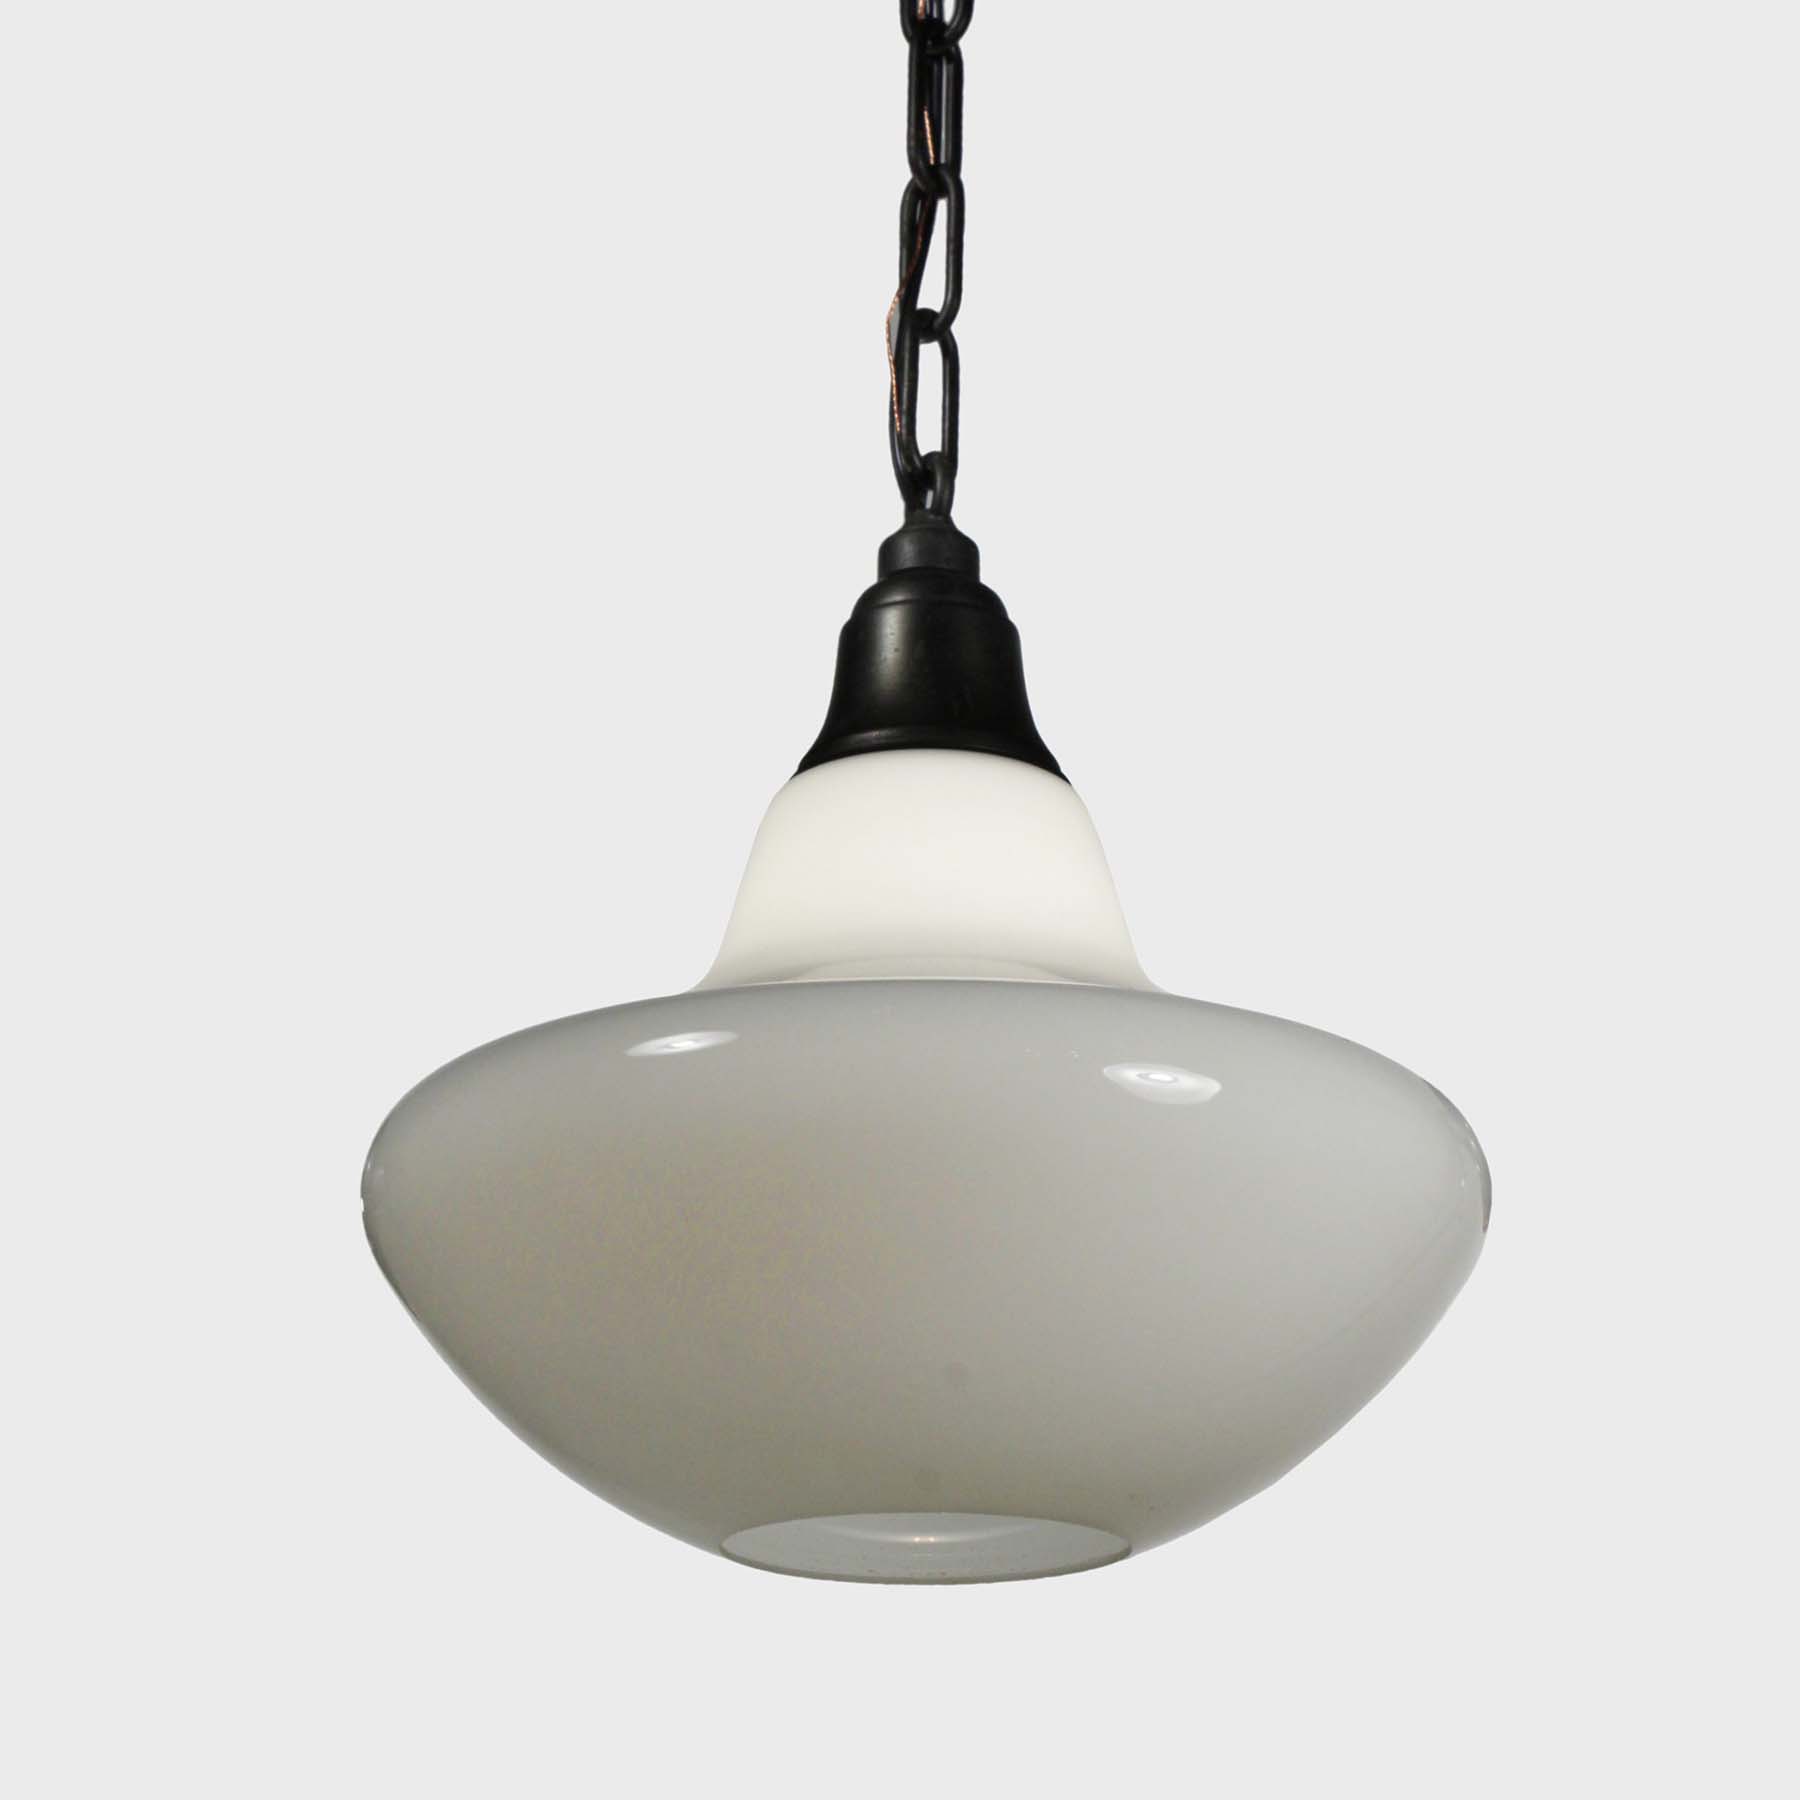 SOLD Antique Schoolhouse Pendant Light with Unusual Shade-69684